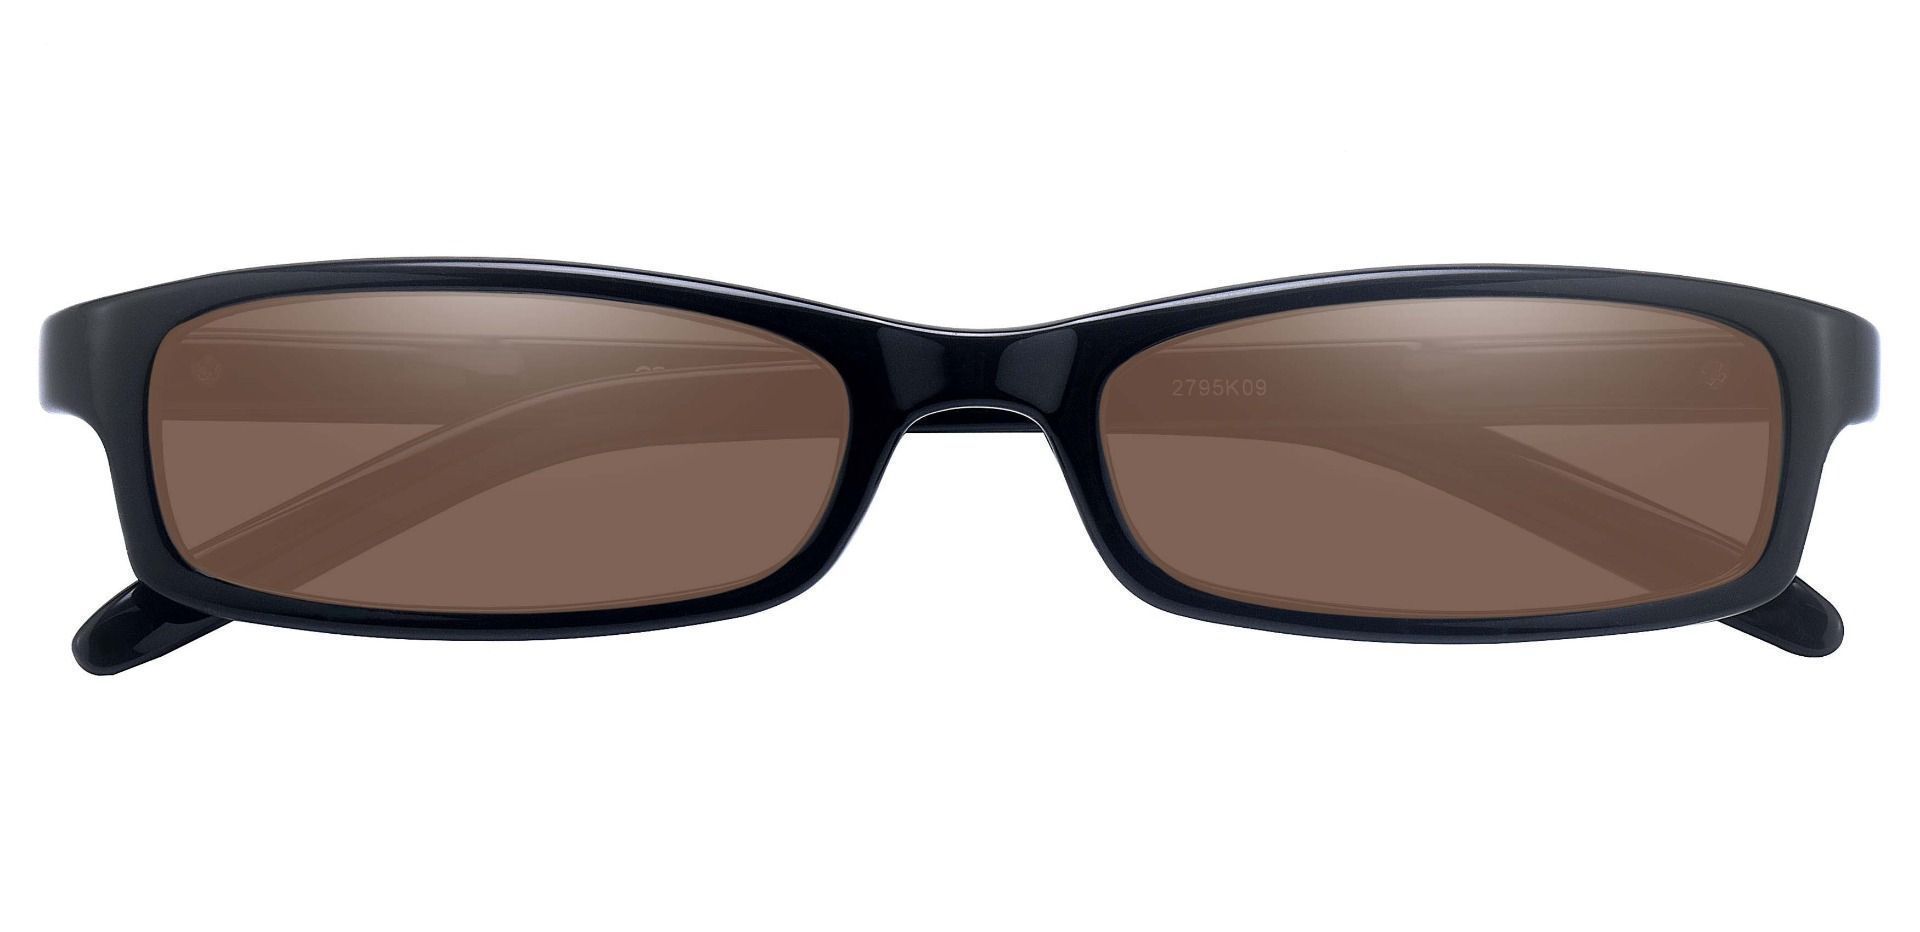 Palmer Rectangle Single Vision Sunglasses - Black Frame With Brown ...